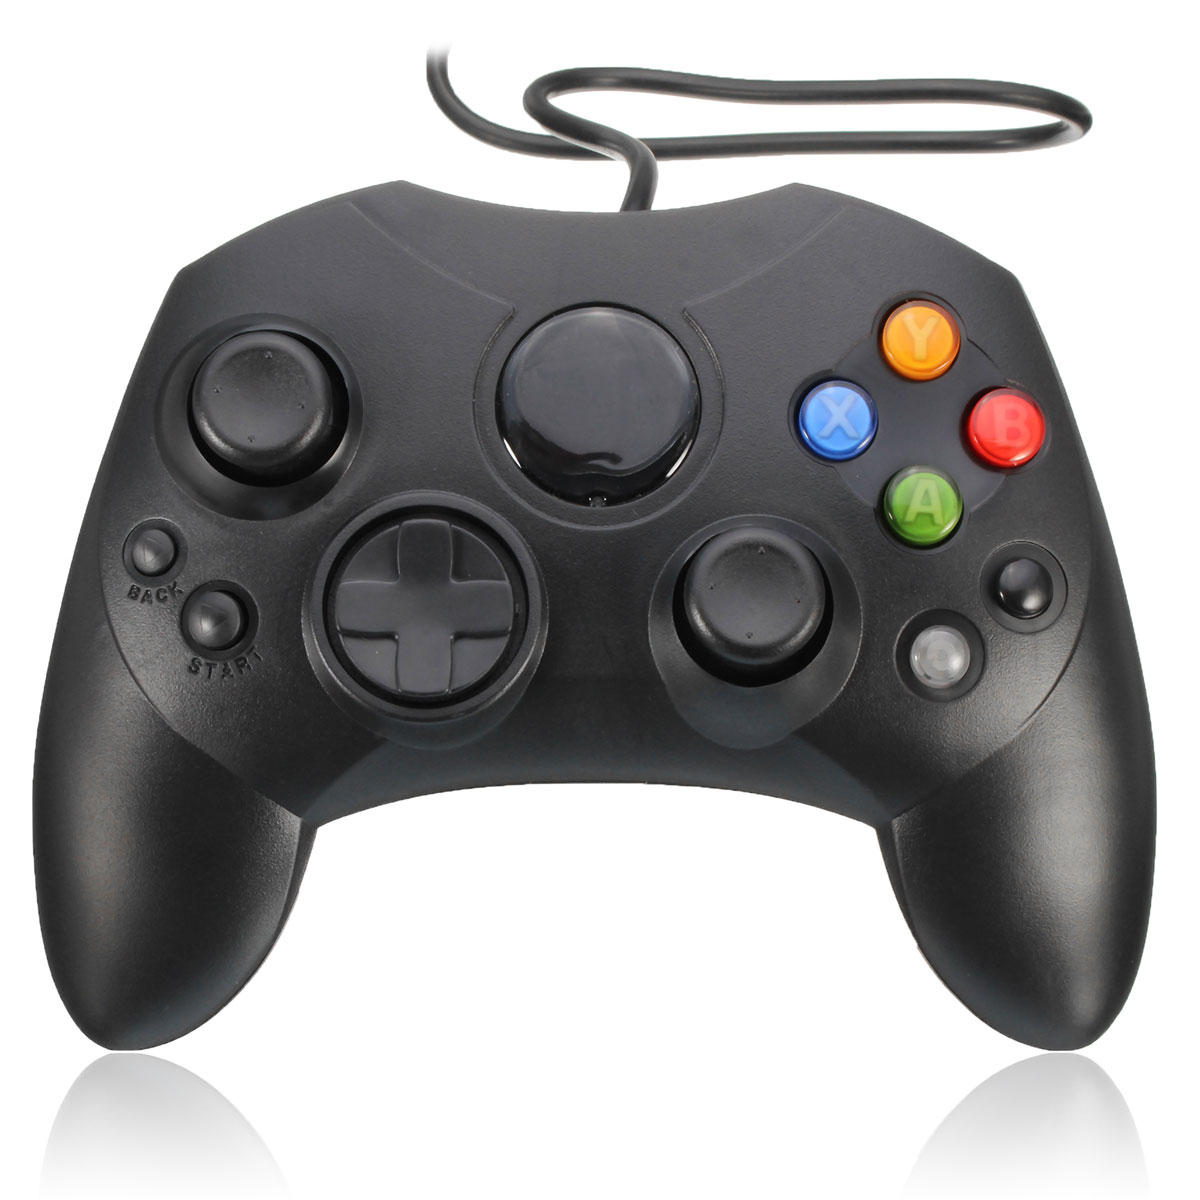 

Black Wired Classic Gamepad Joypad Game Controller For Xbox Console